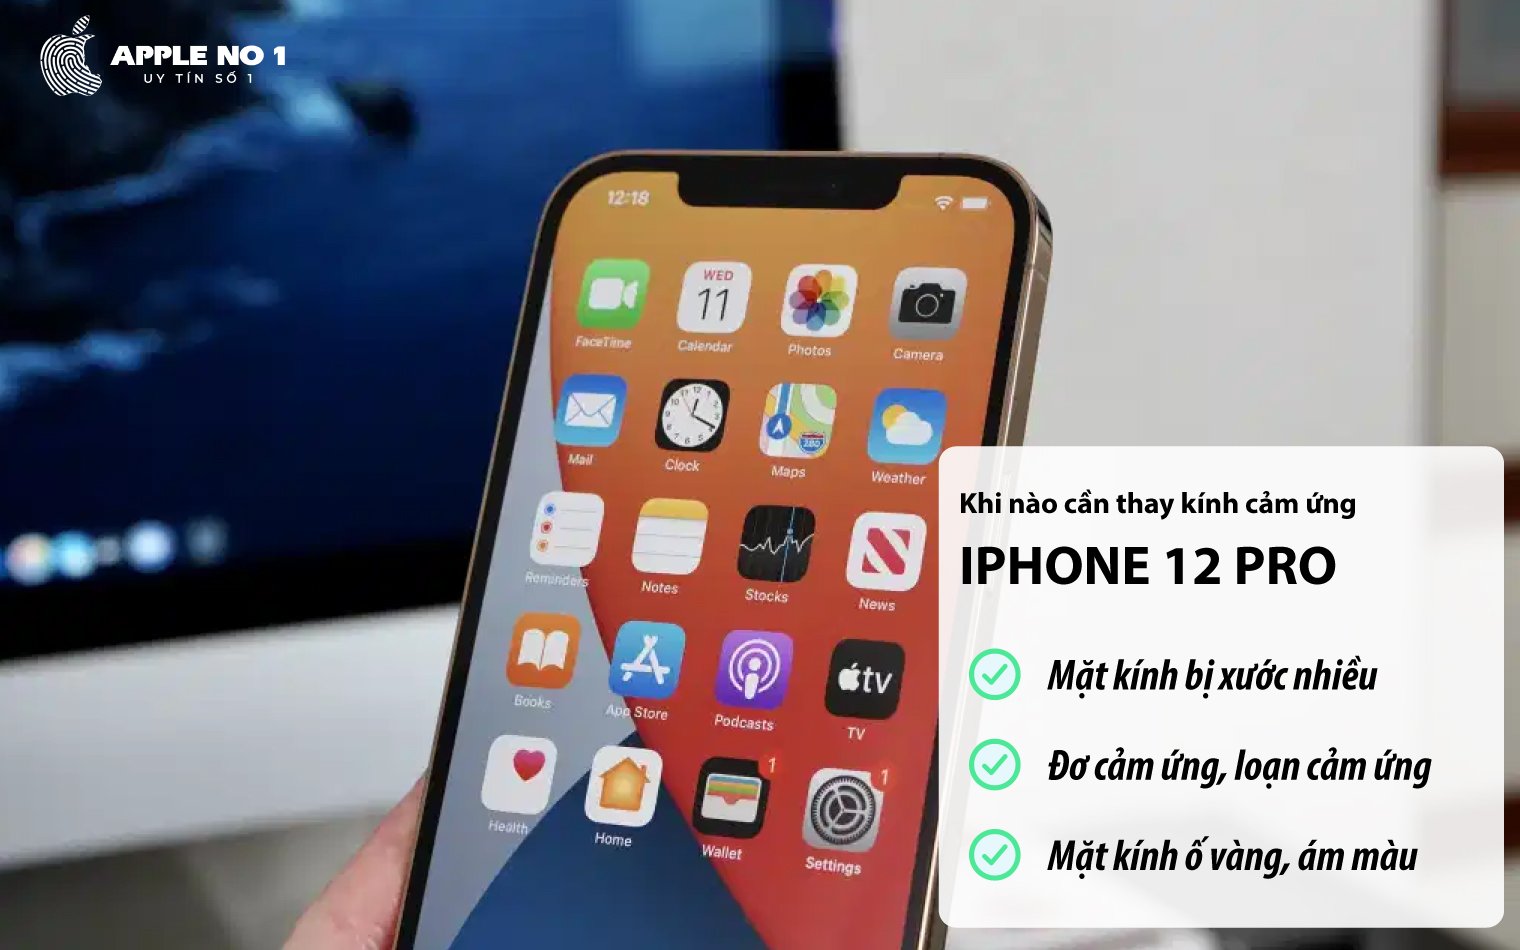 khi nao can thay kinh cam ung iphone 12 pro